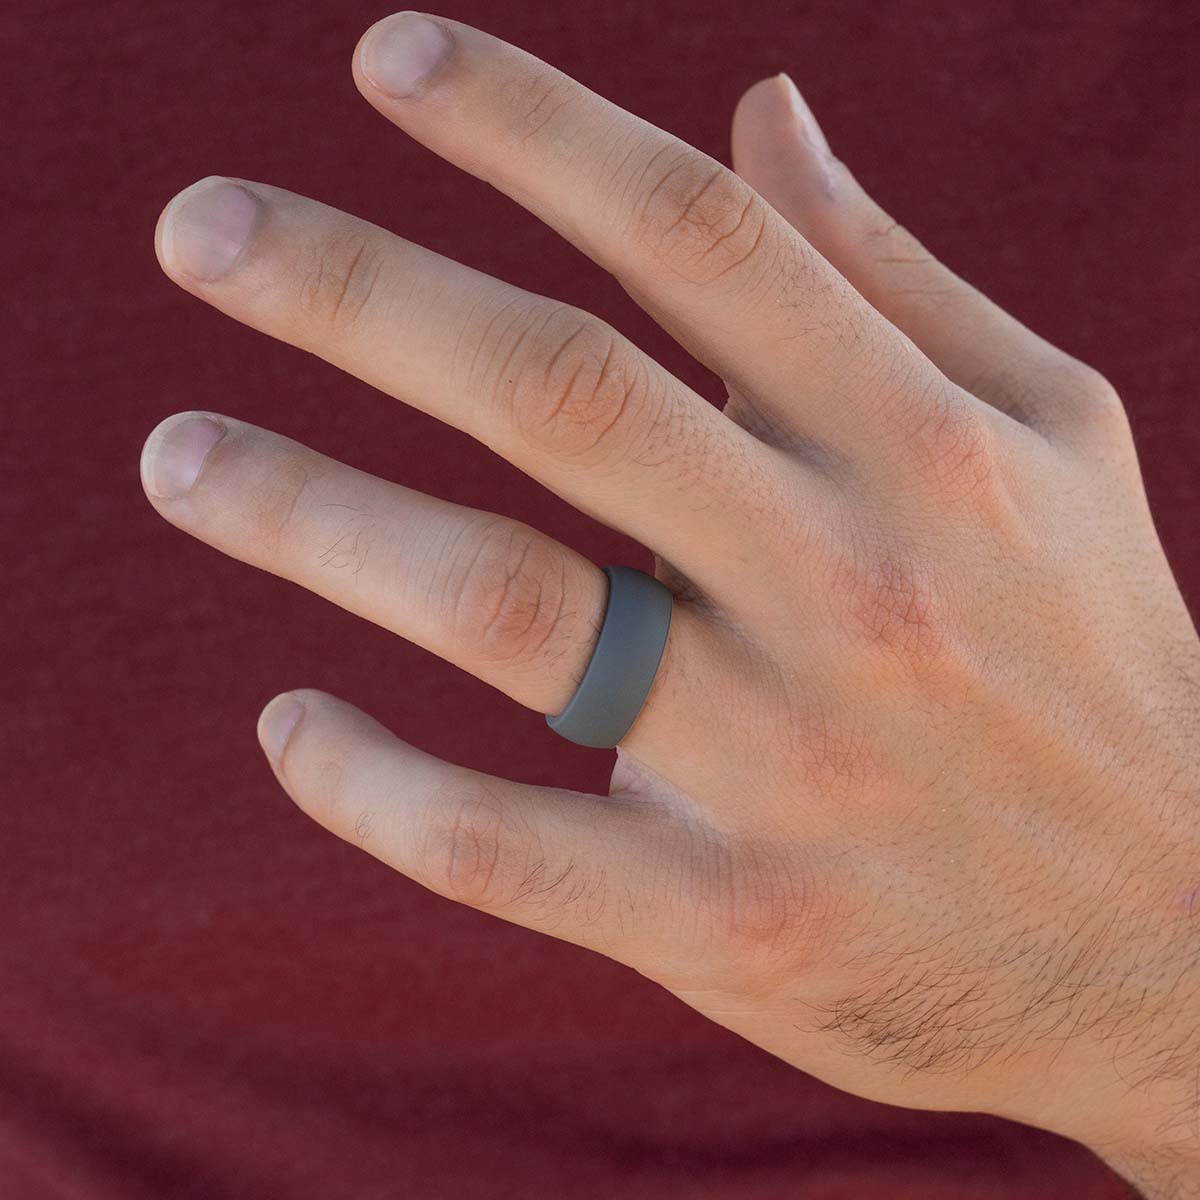 Gray silicone wedding ring on a male hand